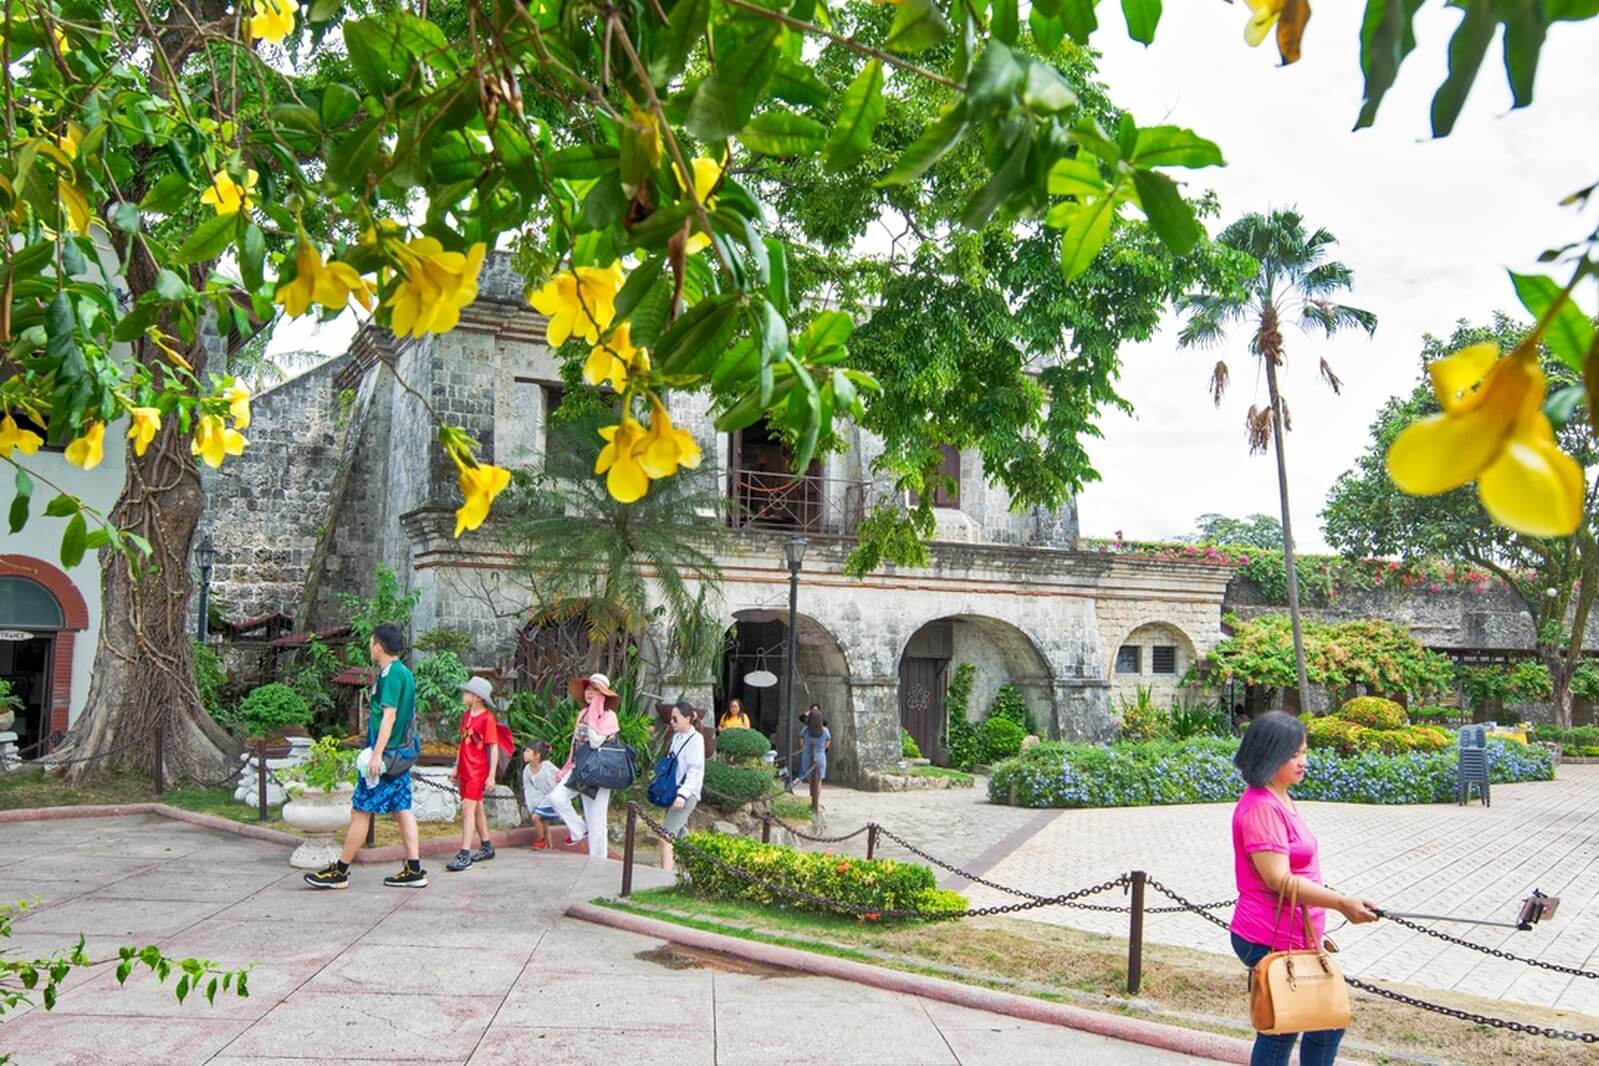 Image of Fort San Pedro Cebu City Philippines by Steve West